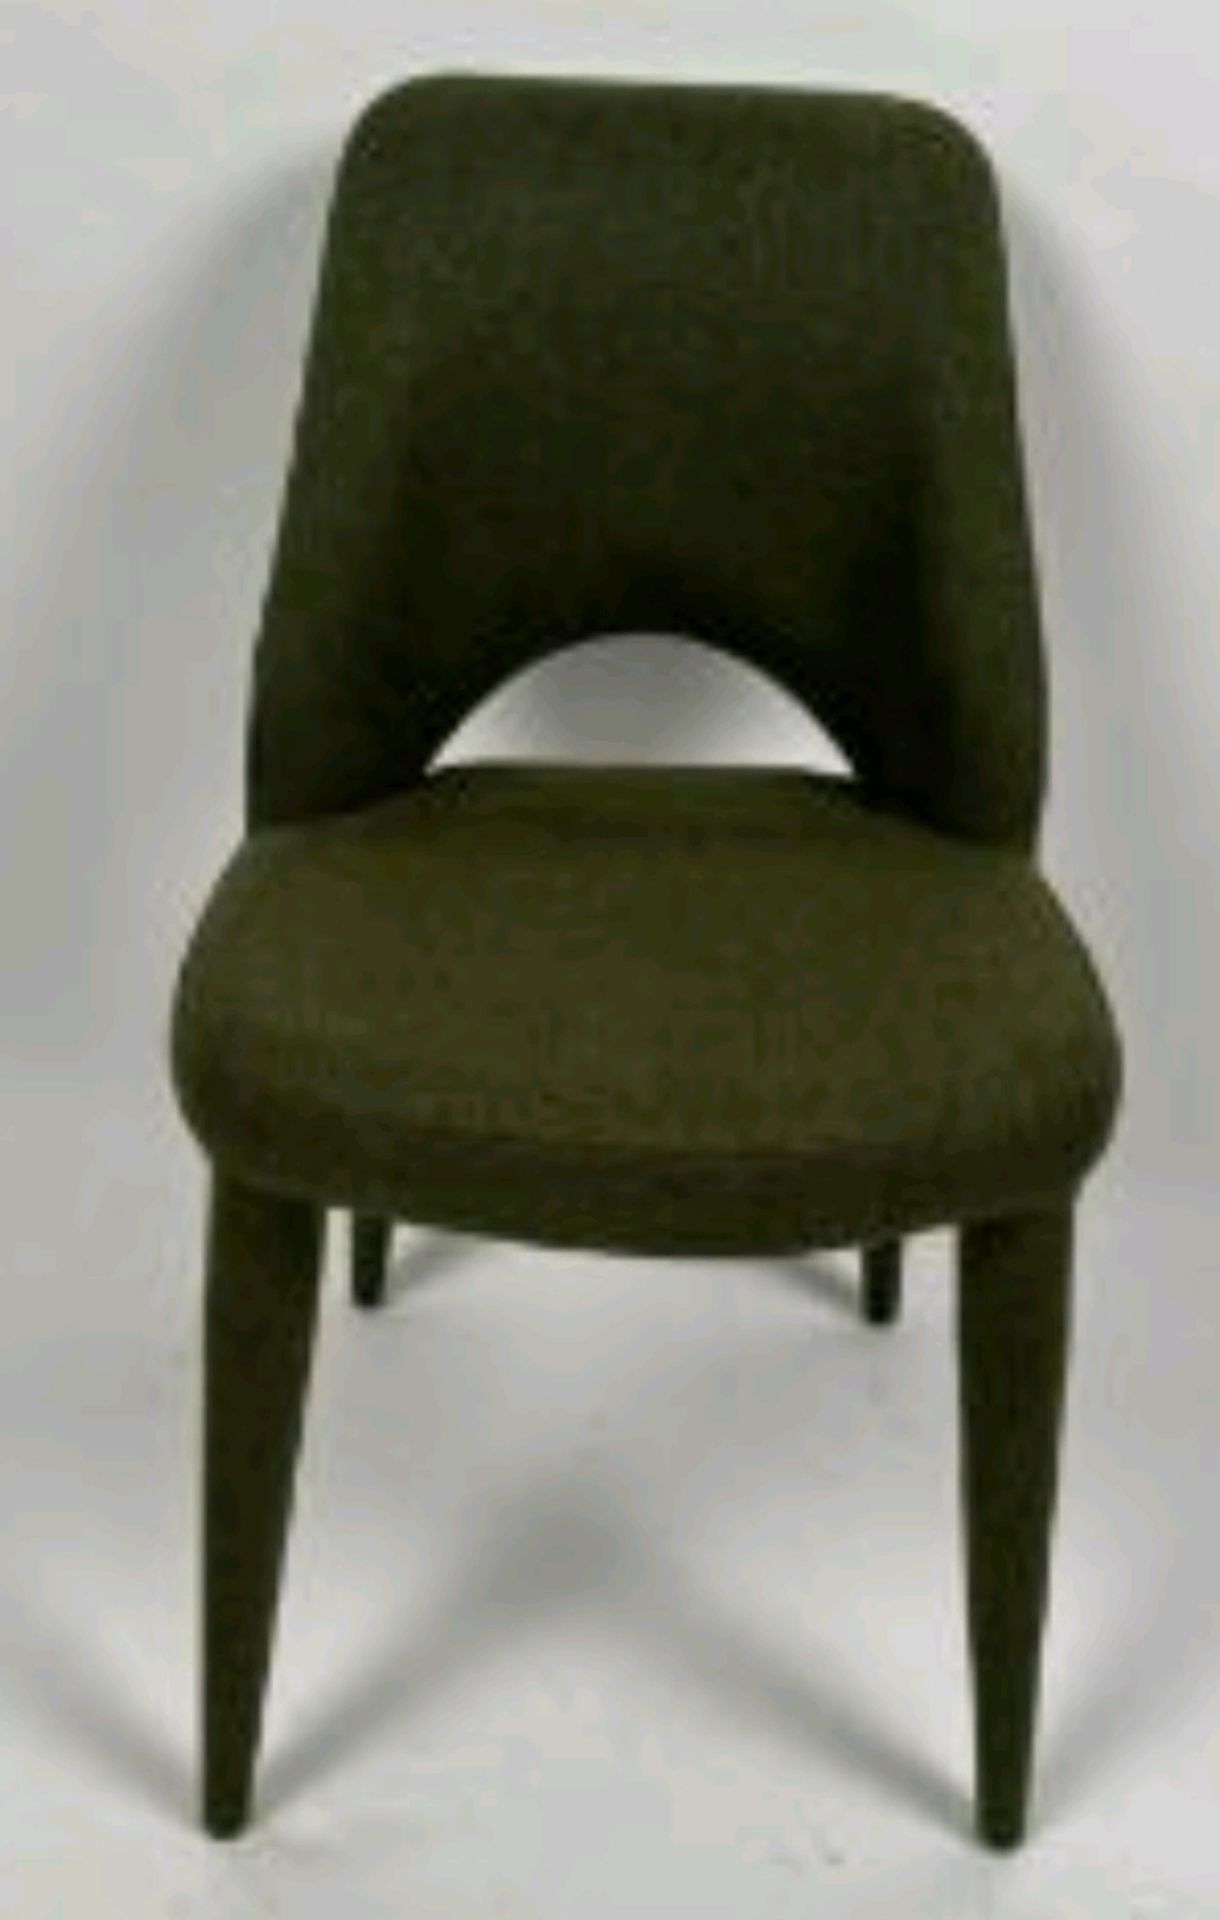 Pols Potten Holy Padded Chair Forest Green - Image 4 of 4